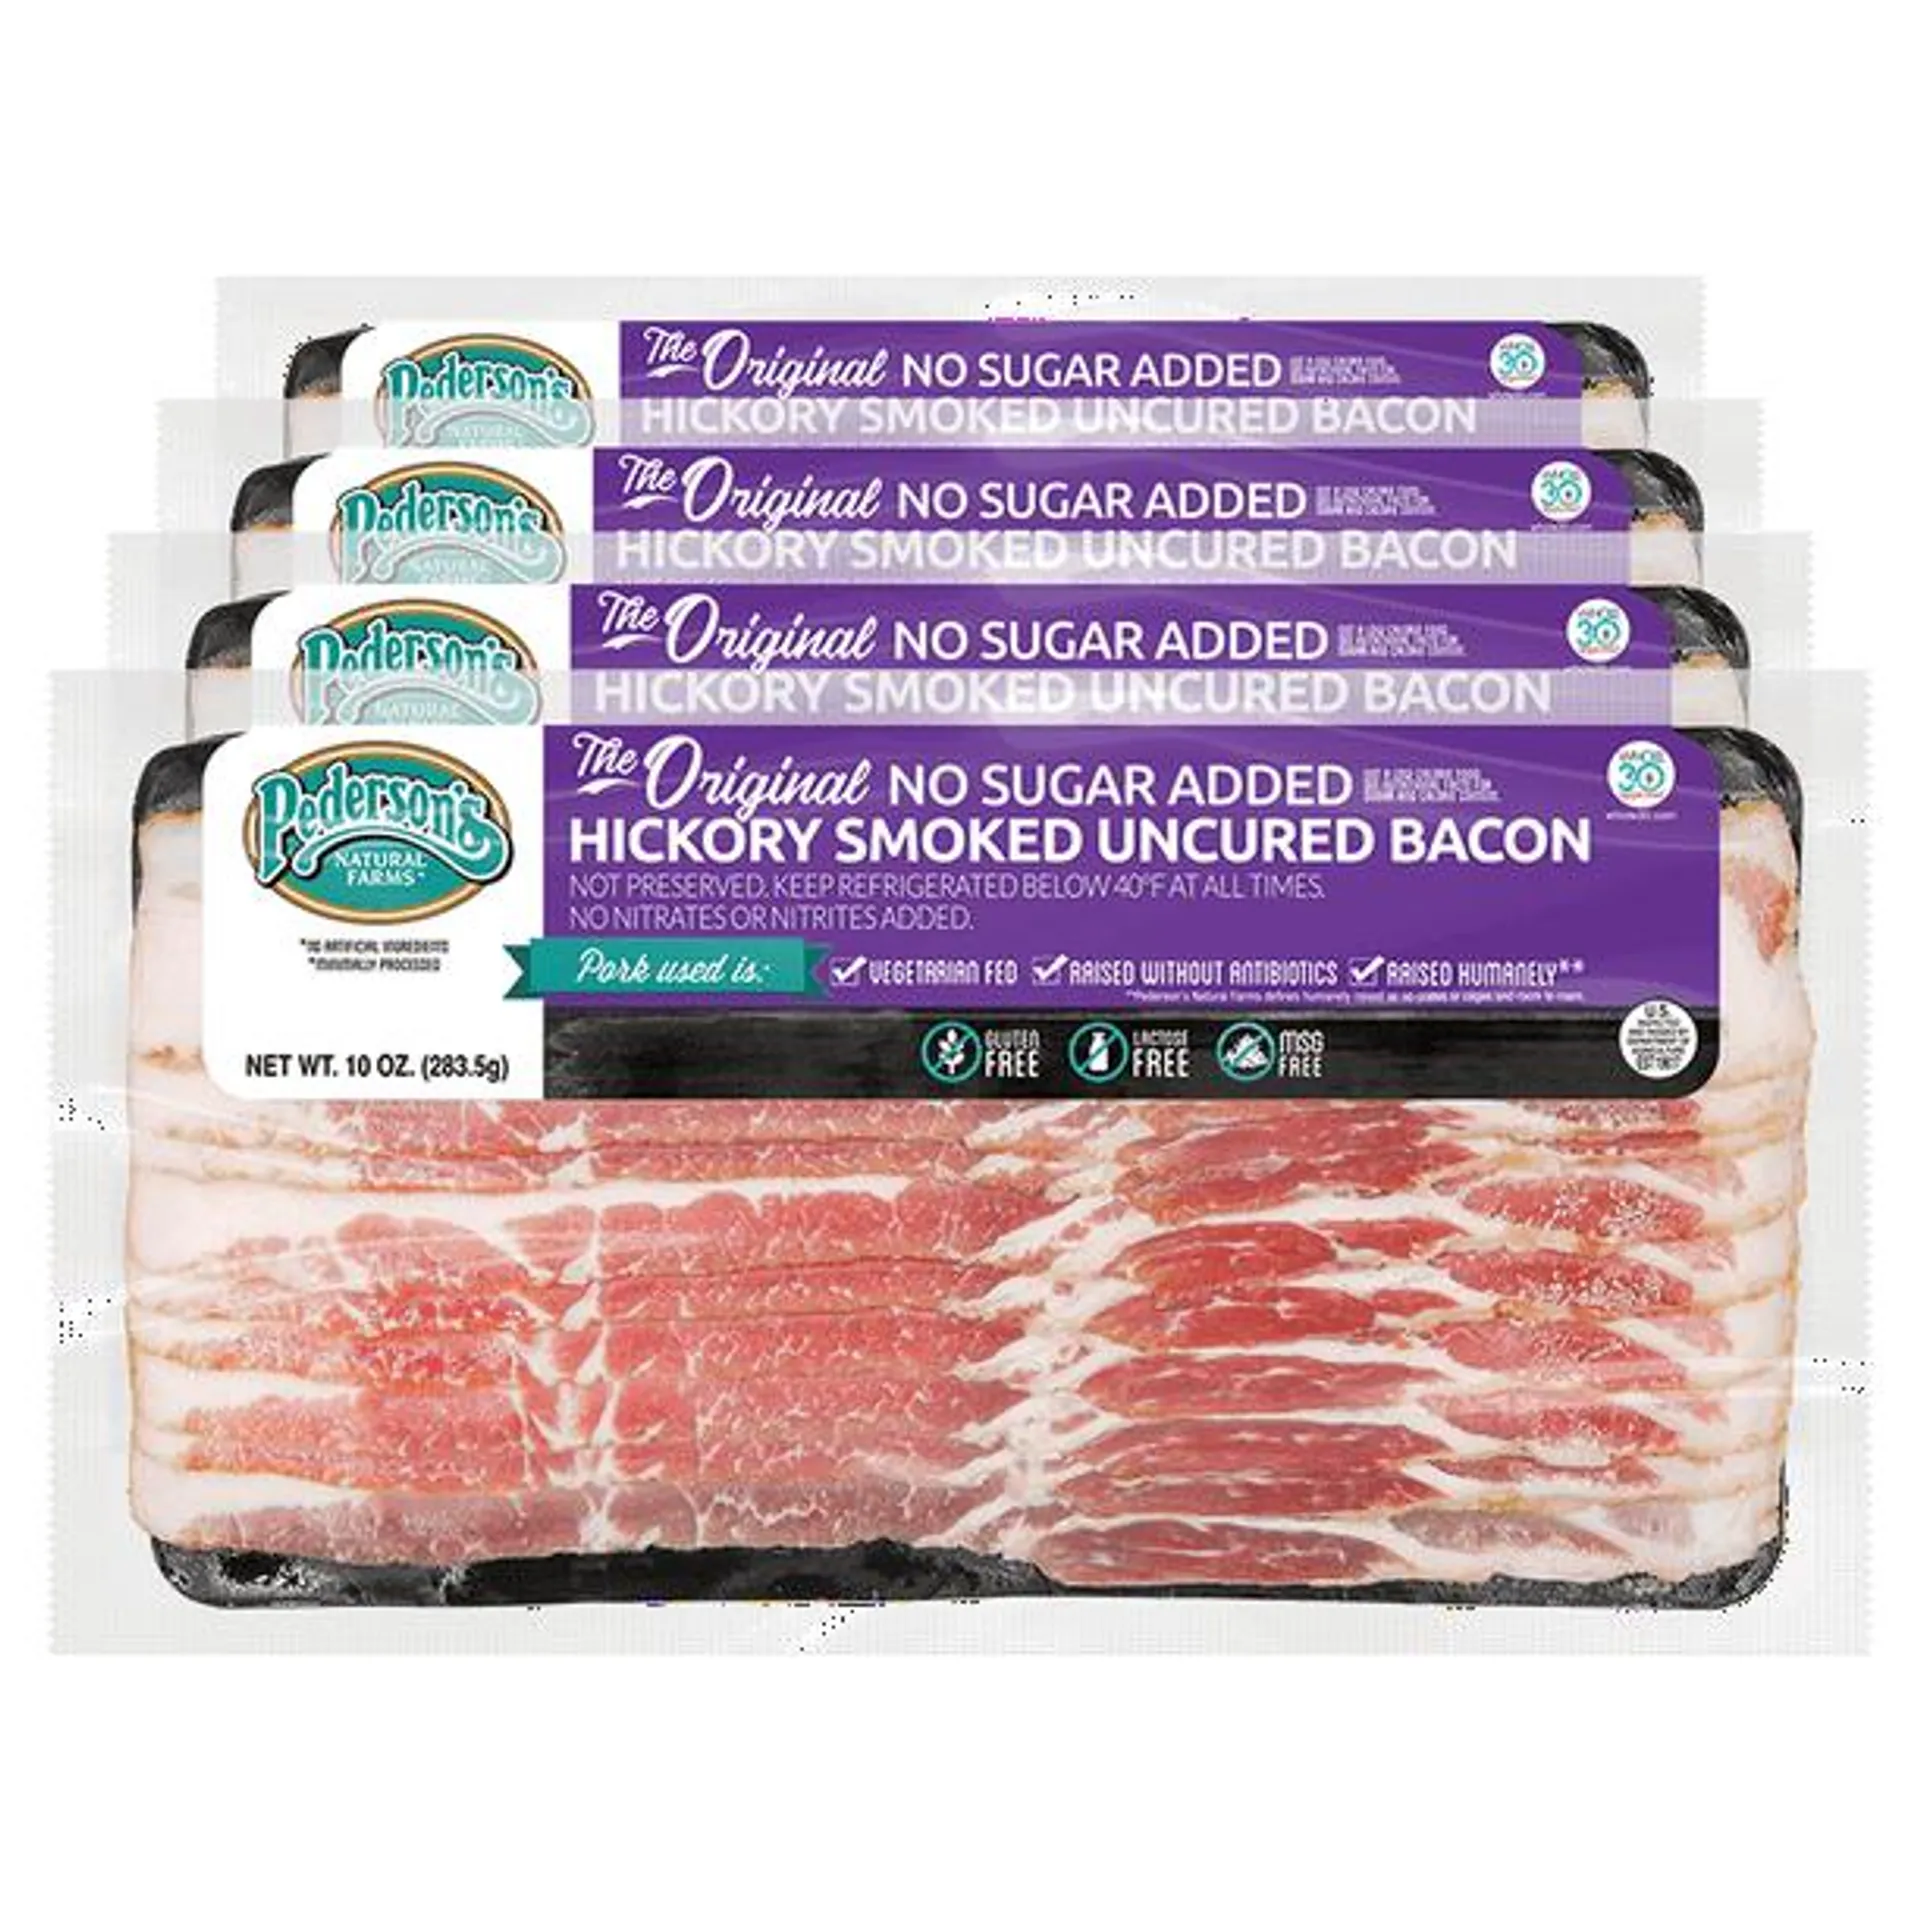 Pedersons Farms, The Original No Sugar Hickory Smoked Uncured Bacon (4 Pack) Whole30, Keto Friendly